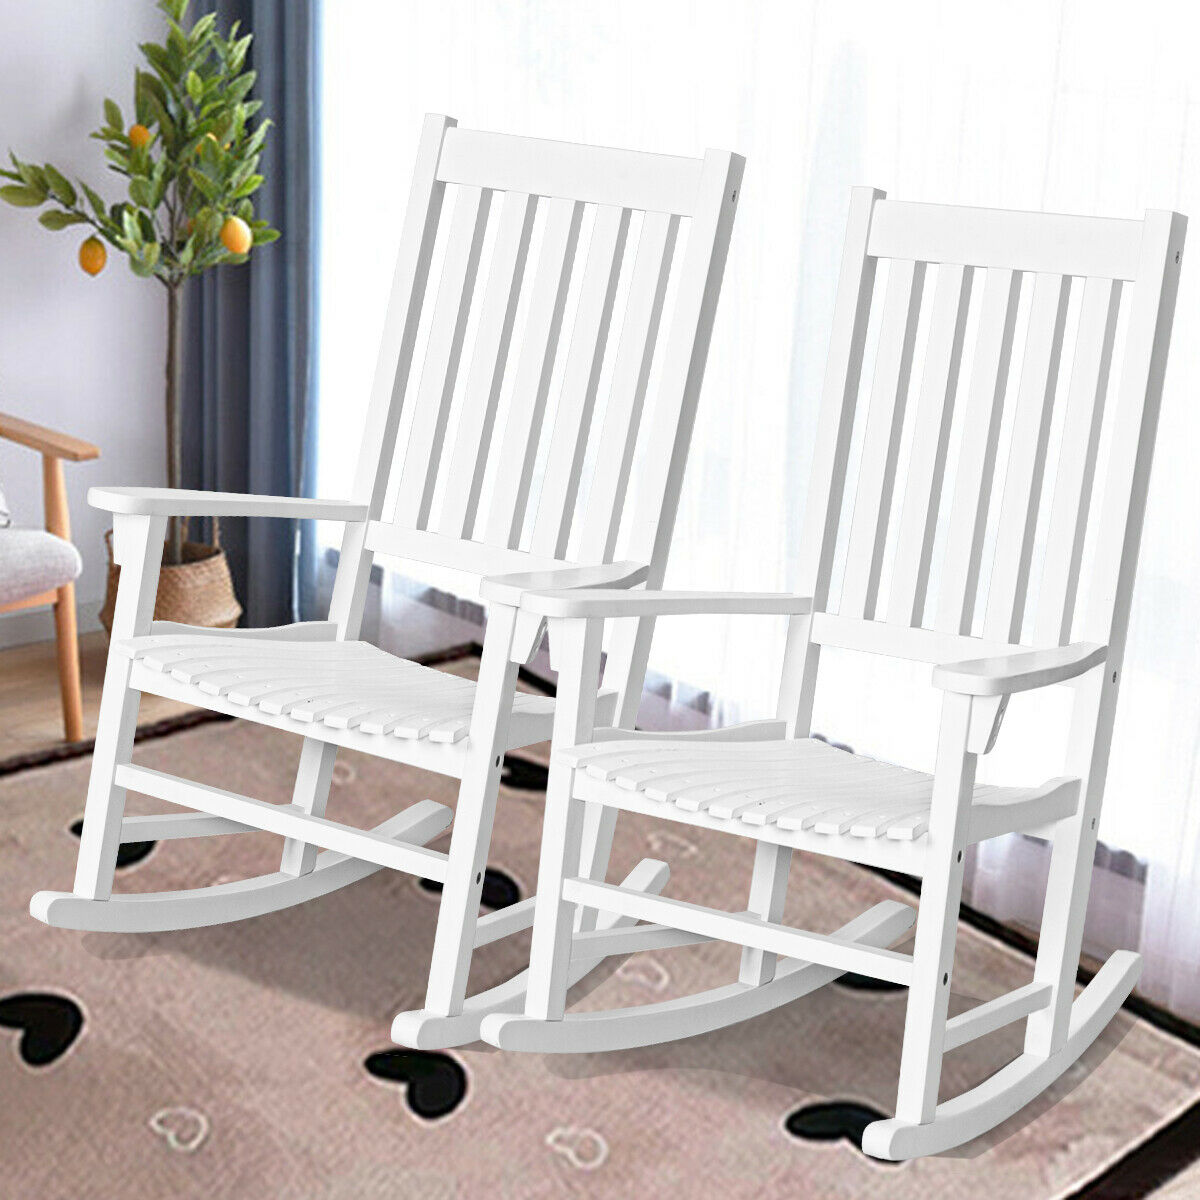 Gymax 2PCS Wood Rocking Chair Porch Rocker High Back Garden Seat Indoor Outdoor White - image 3 of 10